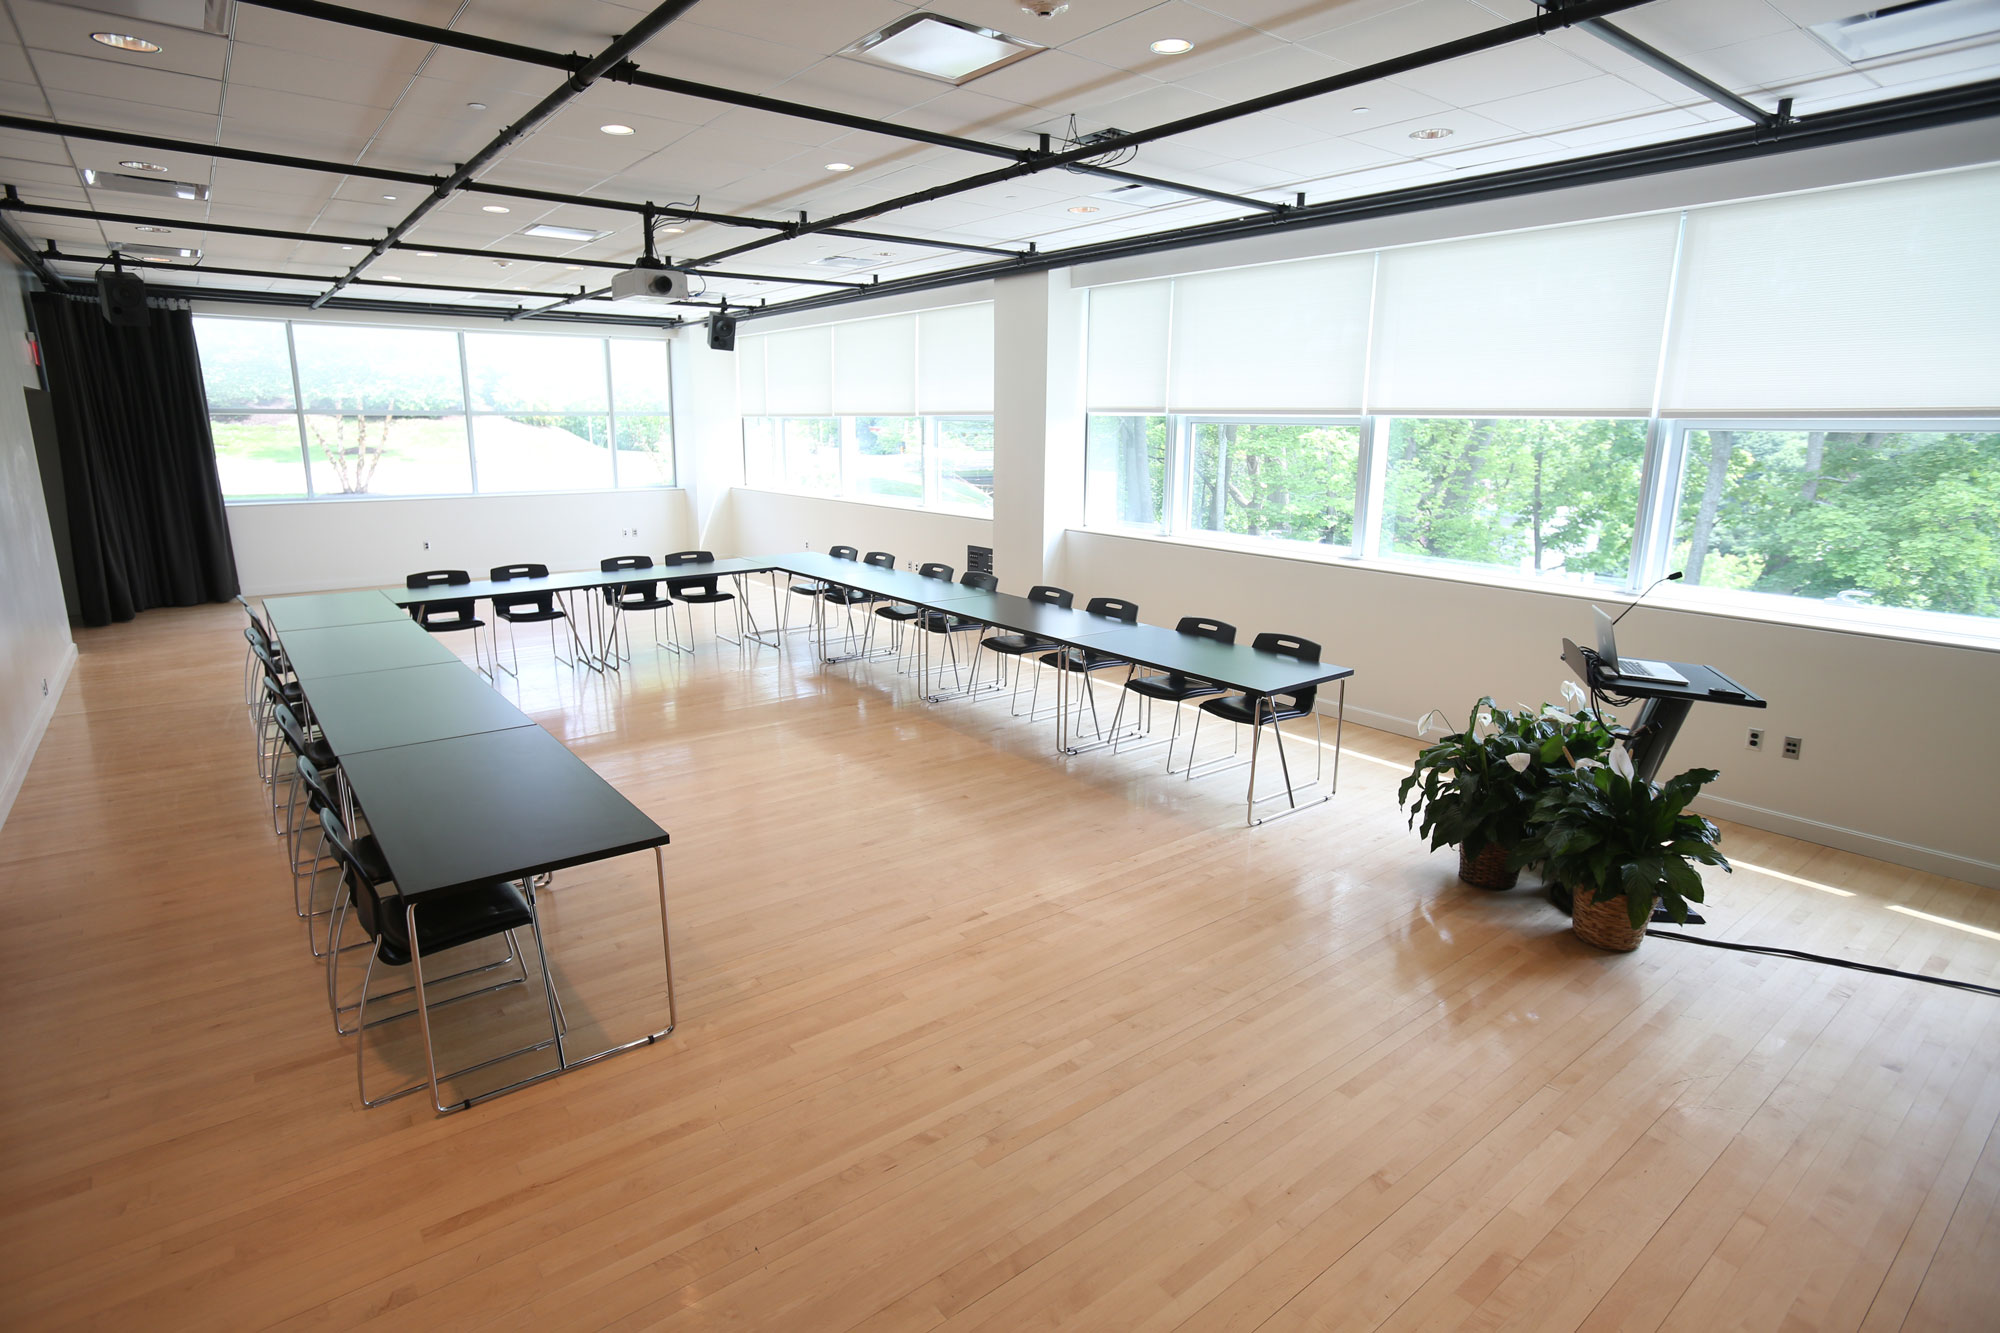 An empty studio with light wood floors, white walls, and black rigging on the ceiling flooded with natural light. A series of black tables are arranged in a U shape, a podium with flowers is positioned in the front of the room. 